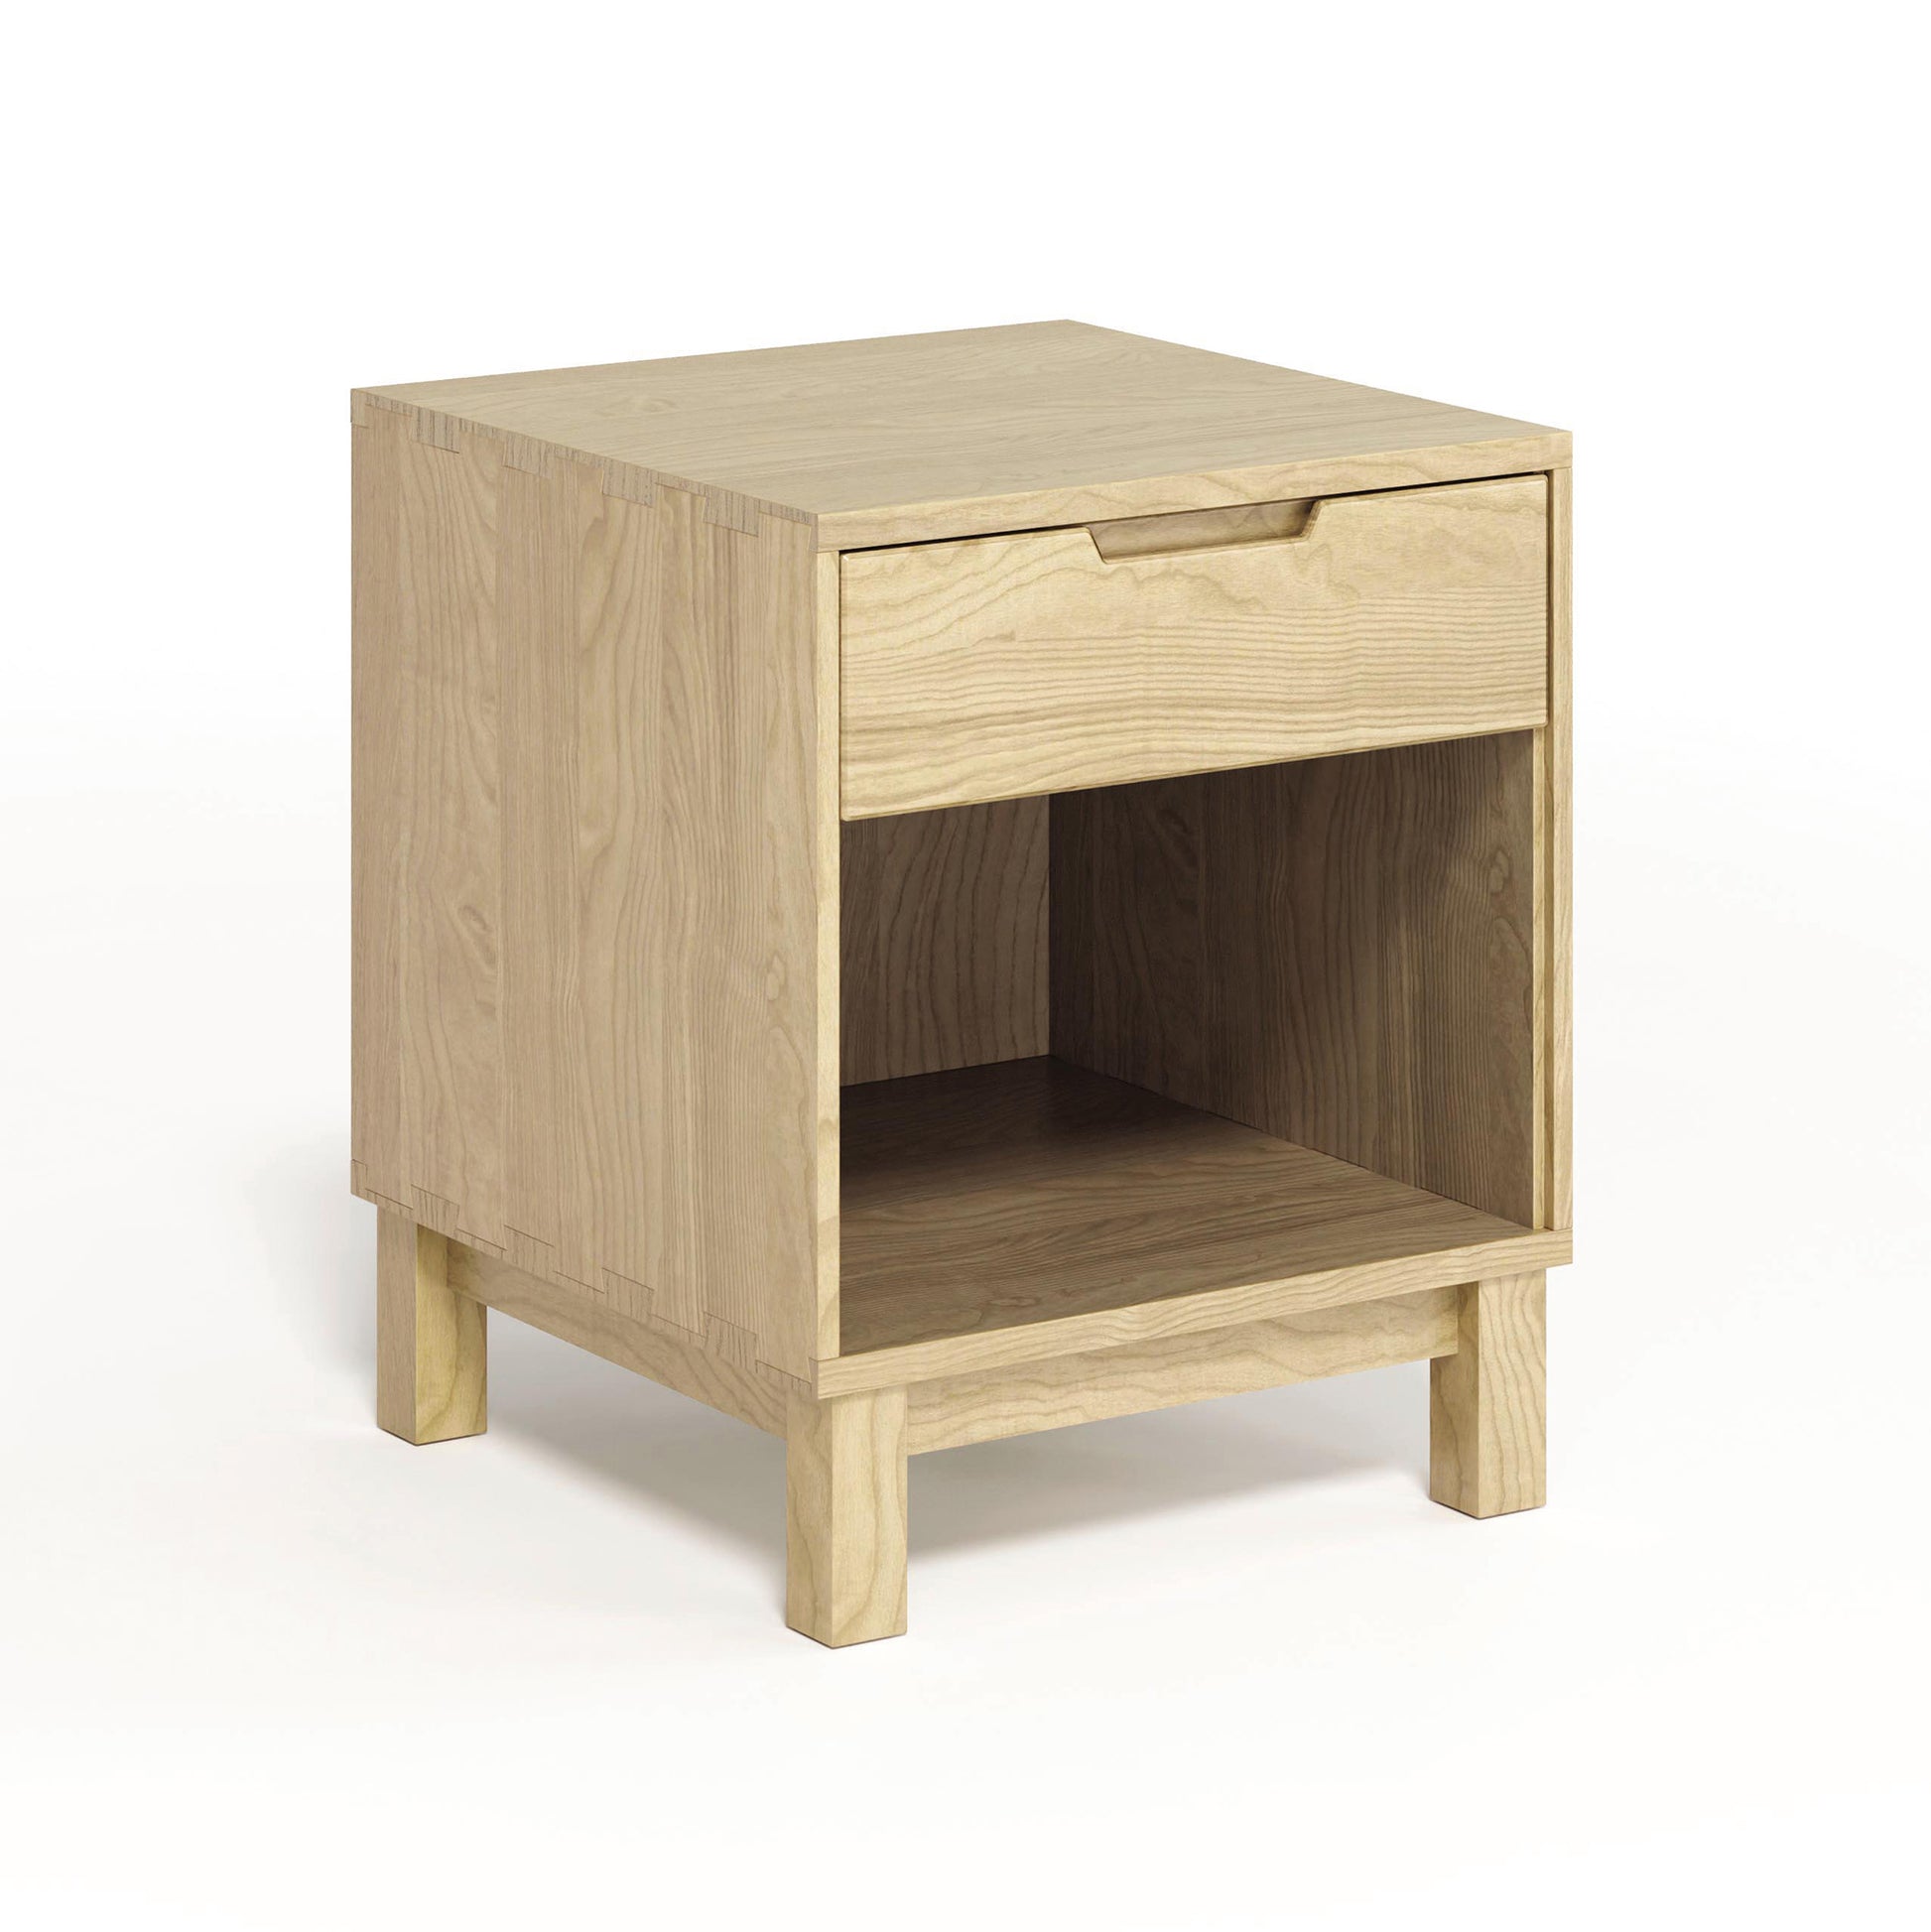 The Copeland Furniture Oslo 1-Drawer Enclosed Shelf Nightstand features a wood finish and a convenient drawer.